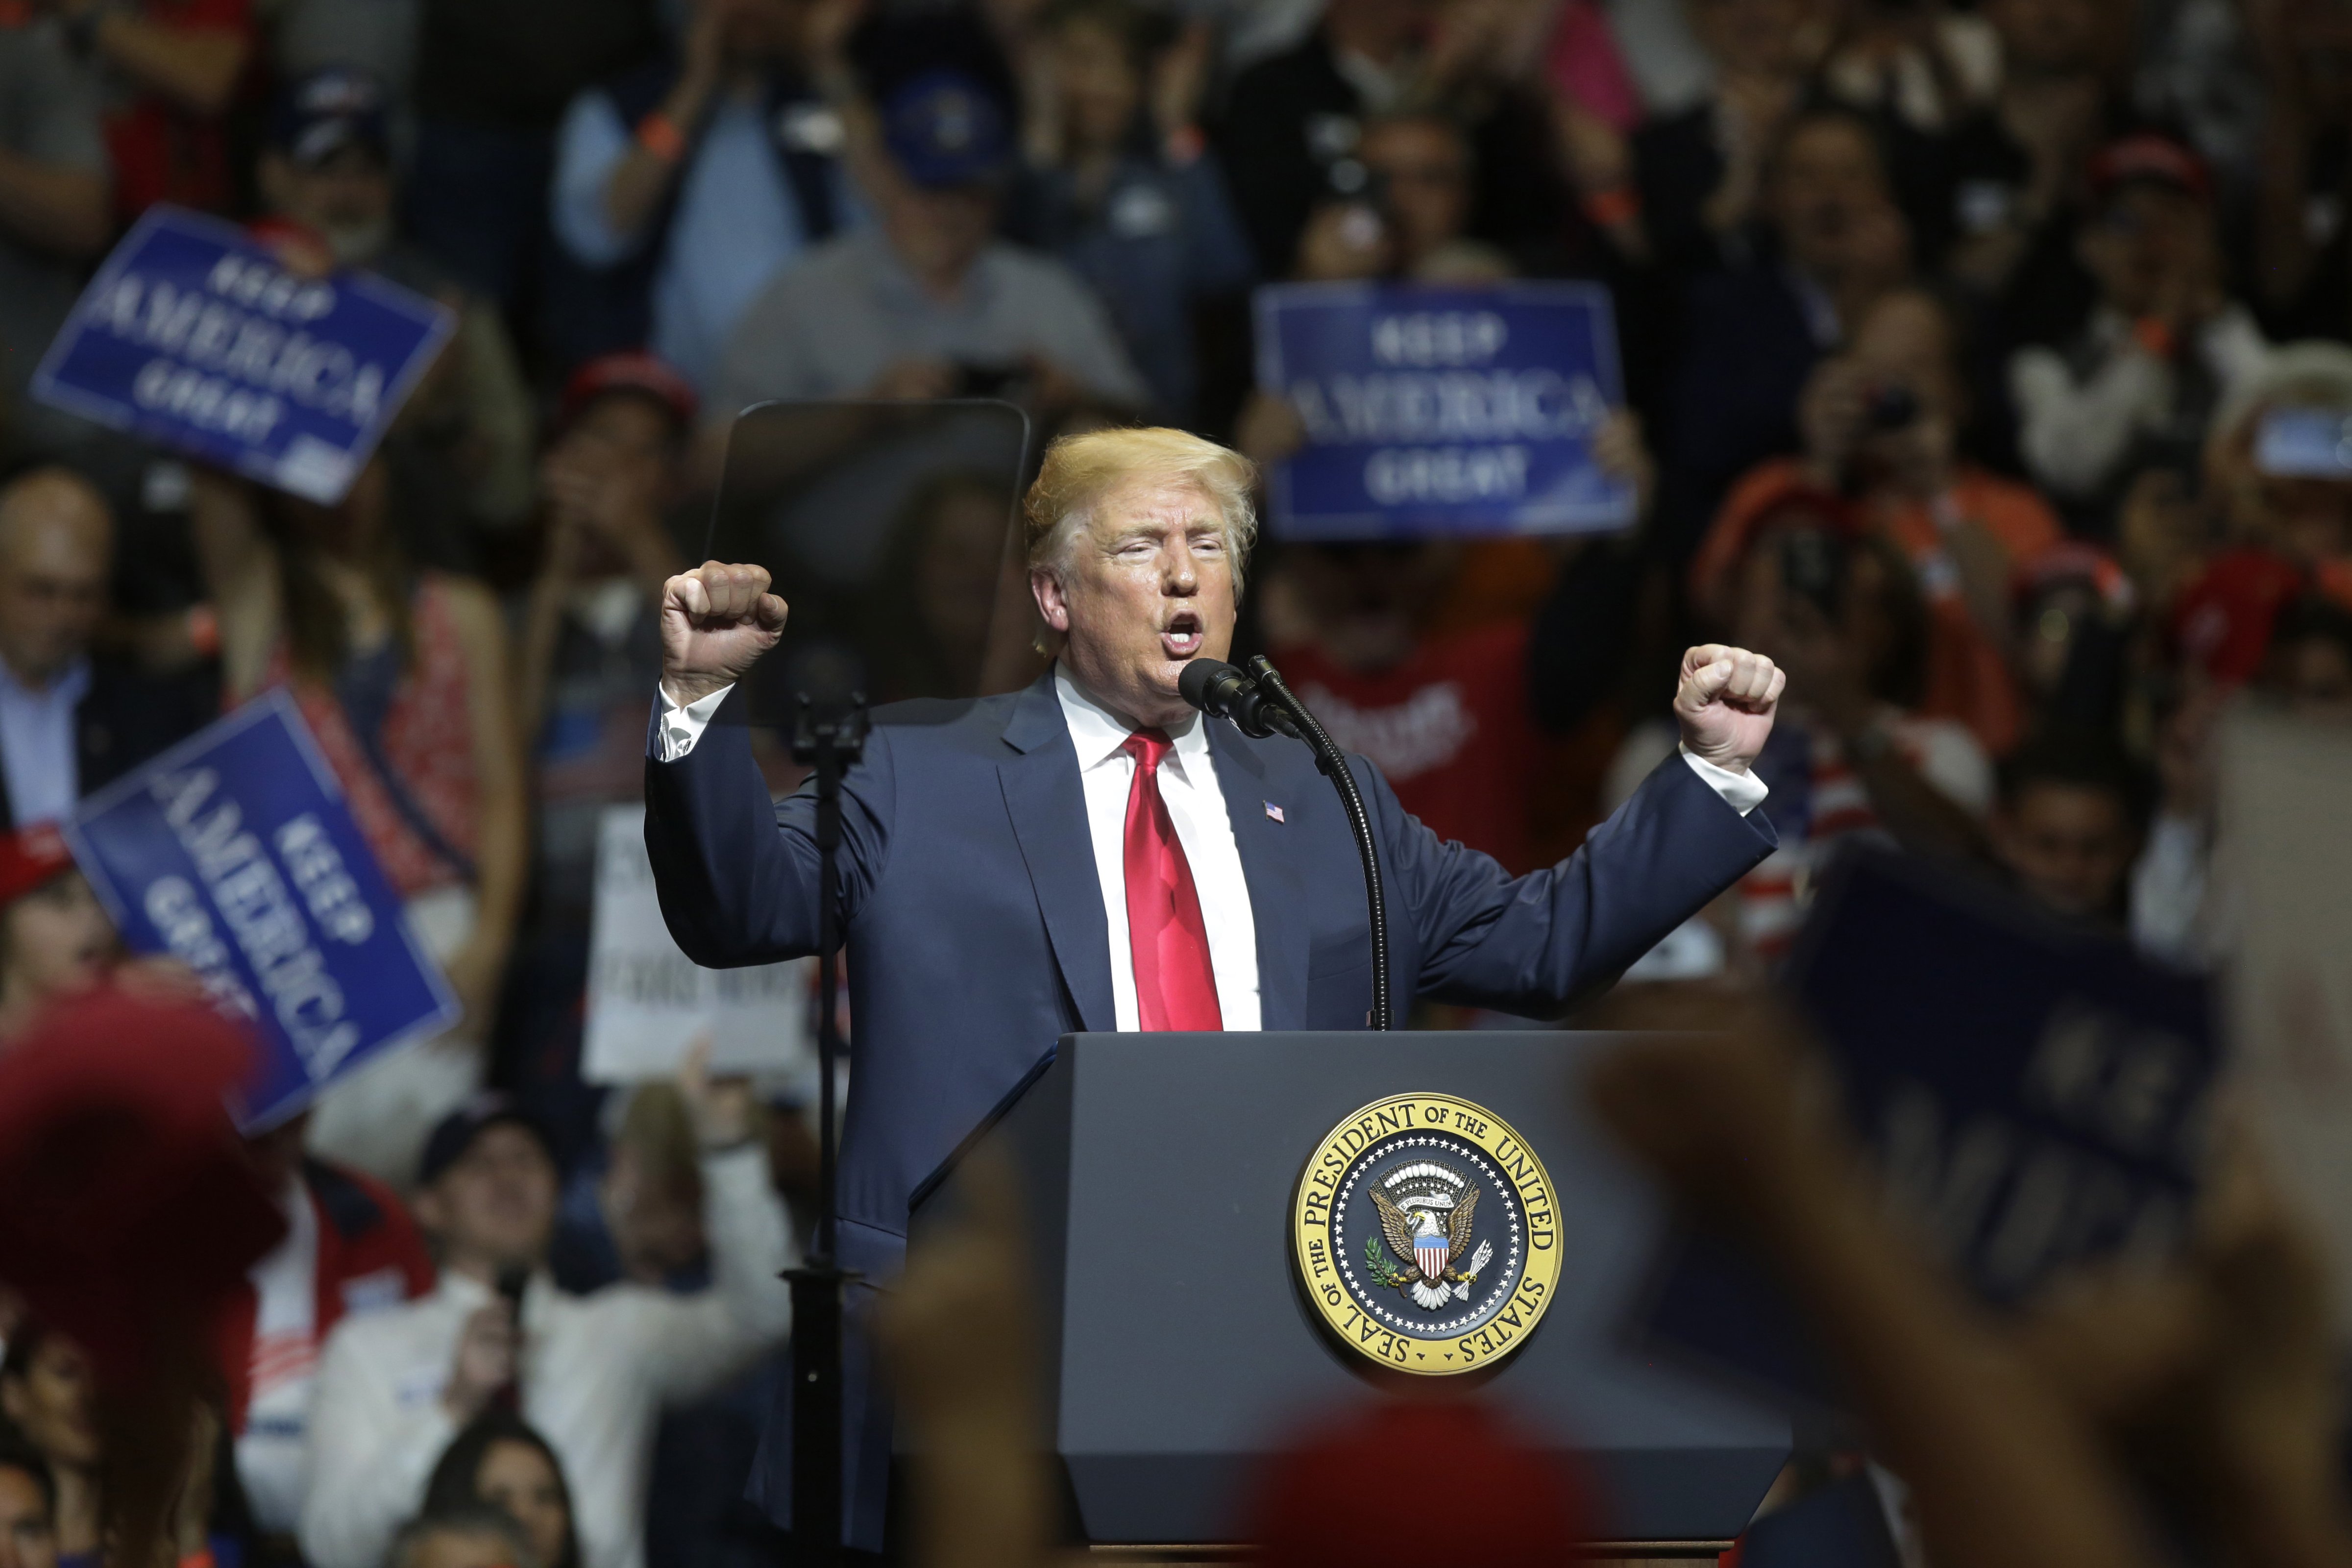 U.S. President Donald Trump speaks during a rally in Elkhart, Indiana, on May 10, 2018. (Joshua Lott&mdash;Bloomberg/Getty Images)